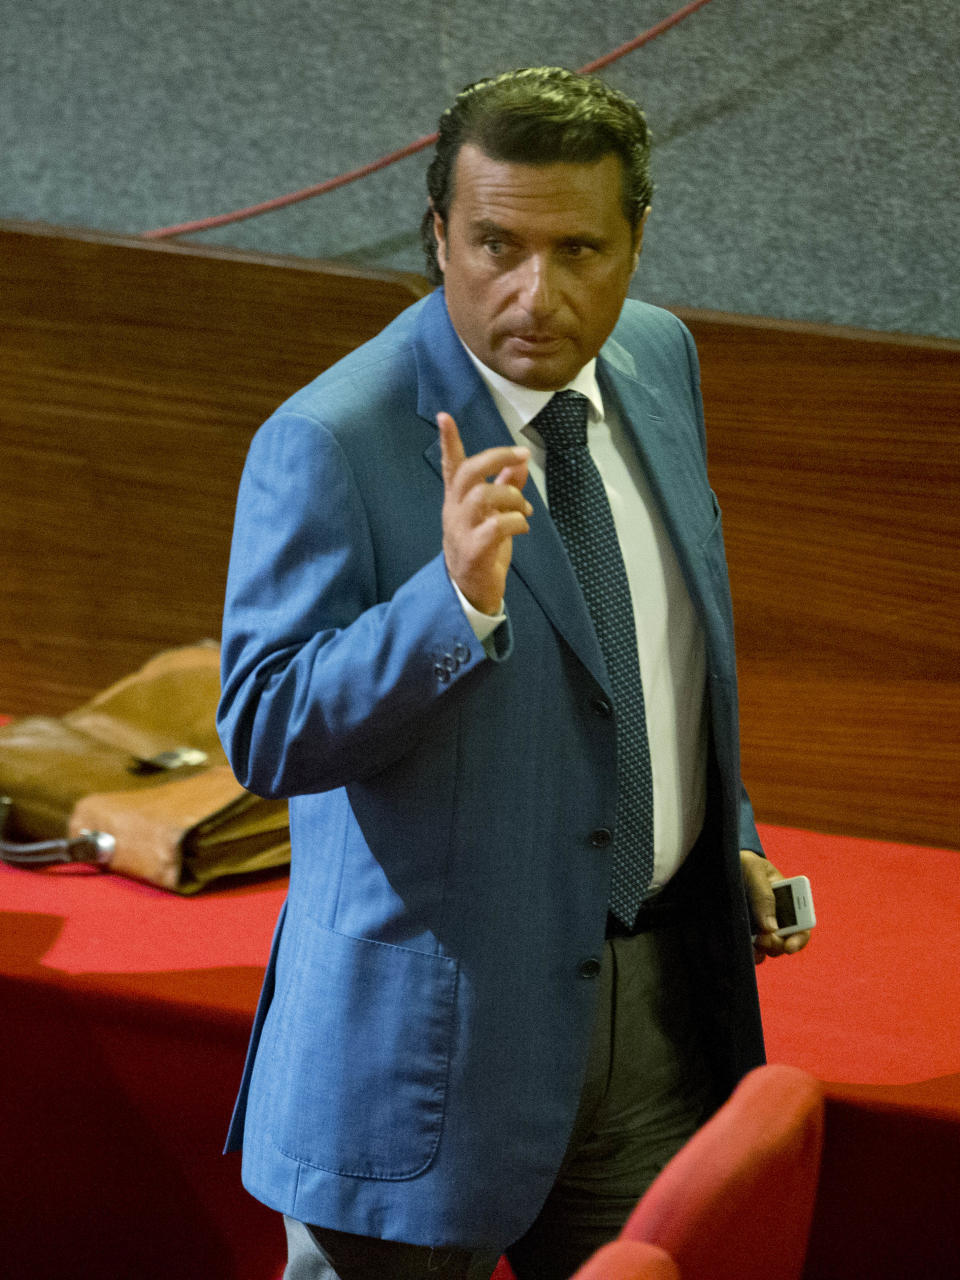 Captain Francesco Schettino leaves the court room of the converted Teatro Moderno theater on the second day of his trial, in Grosseto, Italy, Tuesday, Sept. 24, 2013. The captain of the wrecked Costa Concordia is charged with manslaughter, causing the shipwreck and abandoning ship before the luxury cruise liner's 4,200 passengers and crew could be evacuated on Jan. 13, 2012 when the ship collided with a reef off the Tuscan island of Giglio, killing 32 people. Schettino blames his helmsman for botching a last-minute corrective maneuver that he contends could have prevented the massive cruise ship's collision with the reef. (AP Photo/Andrew Medichini)